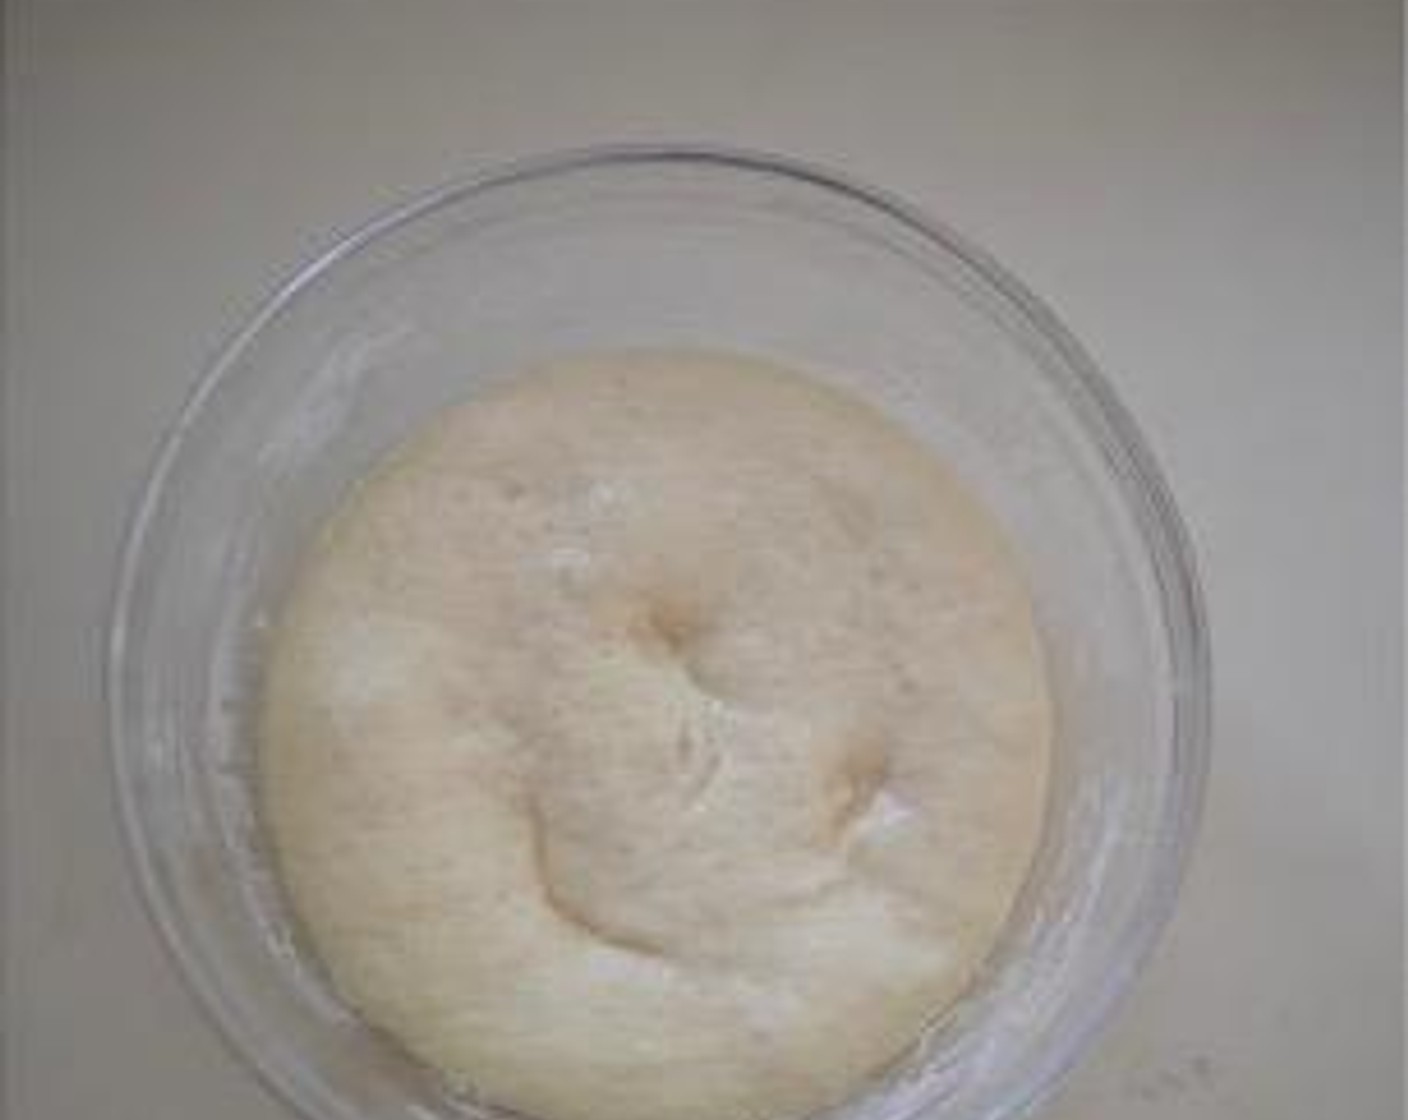 step 3 After 1 hour, place dough into the refrigerator for at least 8 hours or up to 16 hours. Before using, take the sponge dough out of the refrigerator and return to room temperature.